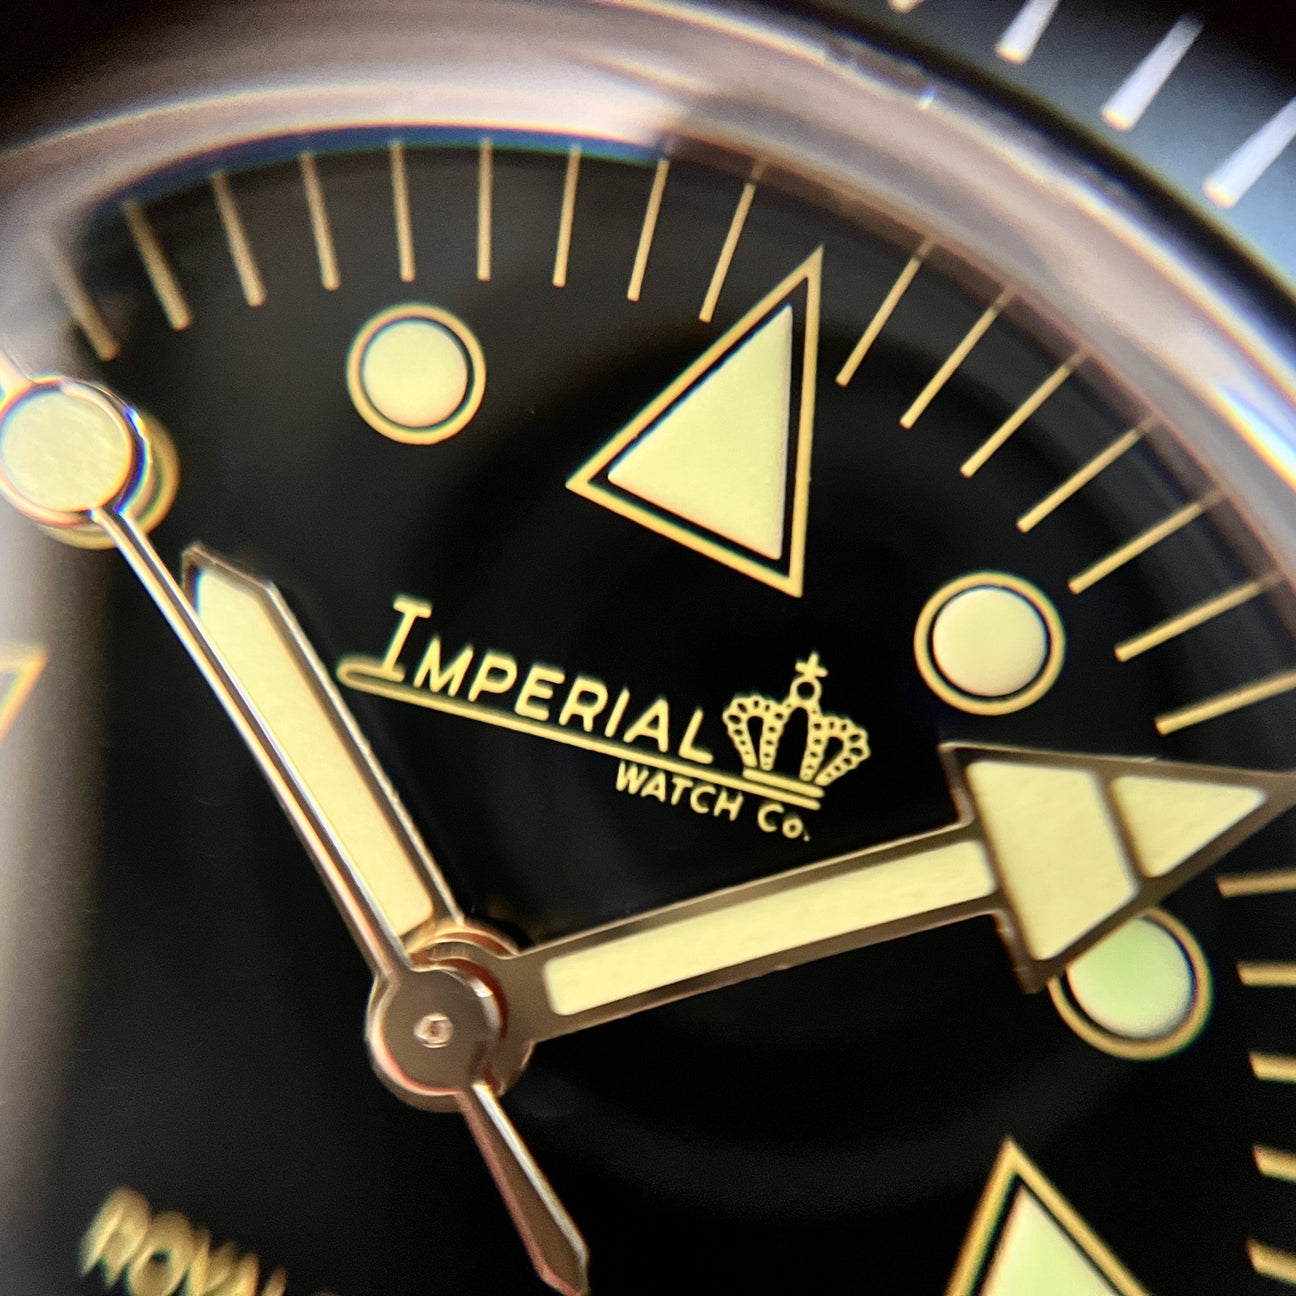 Imperial Watch Co.’s Royalguard 200 IMG_5391_1296x